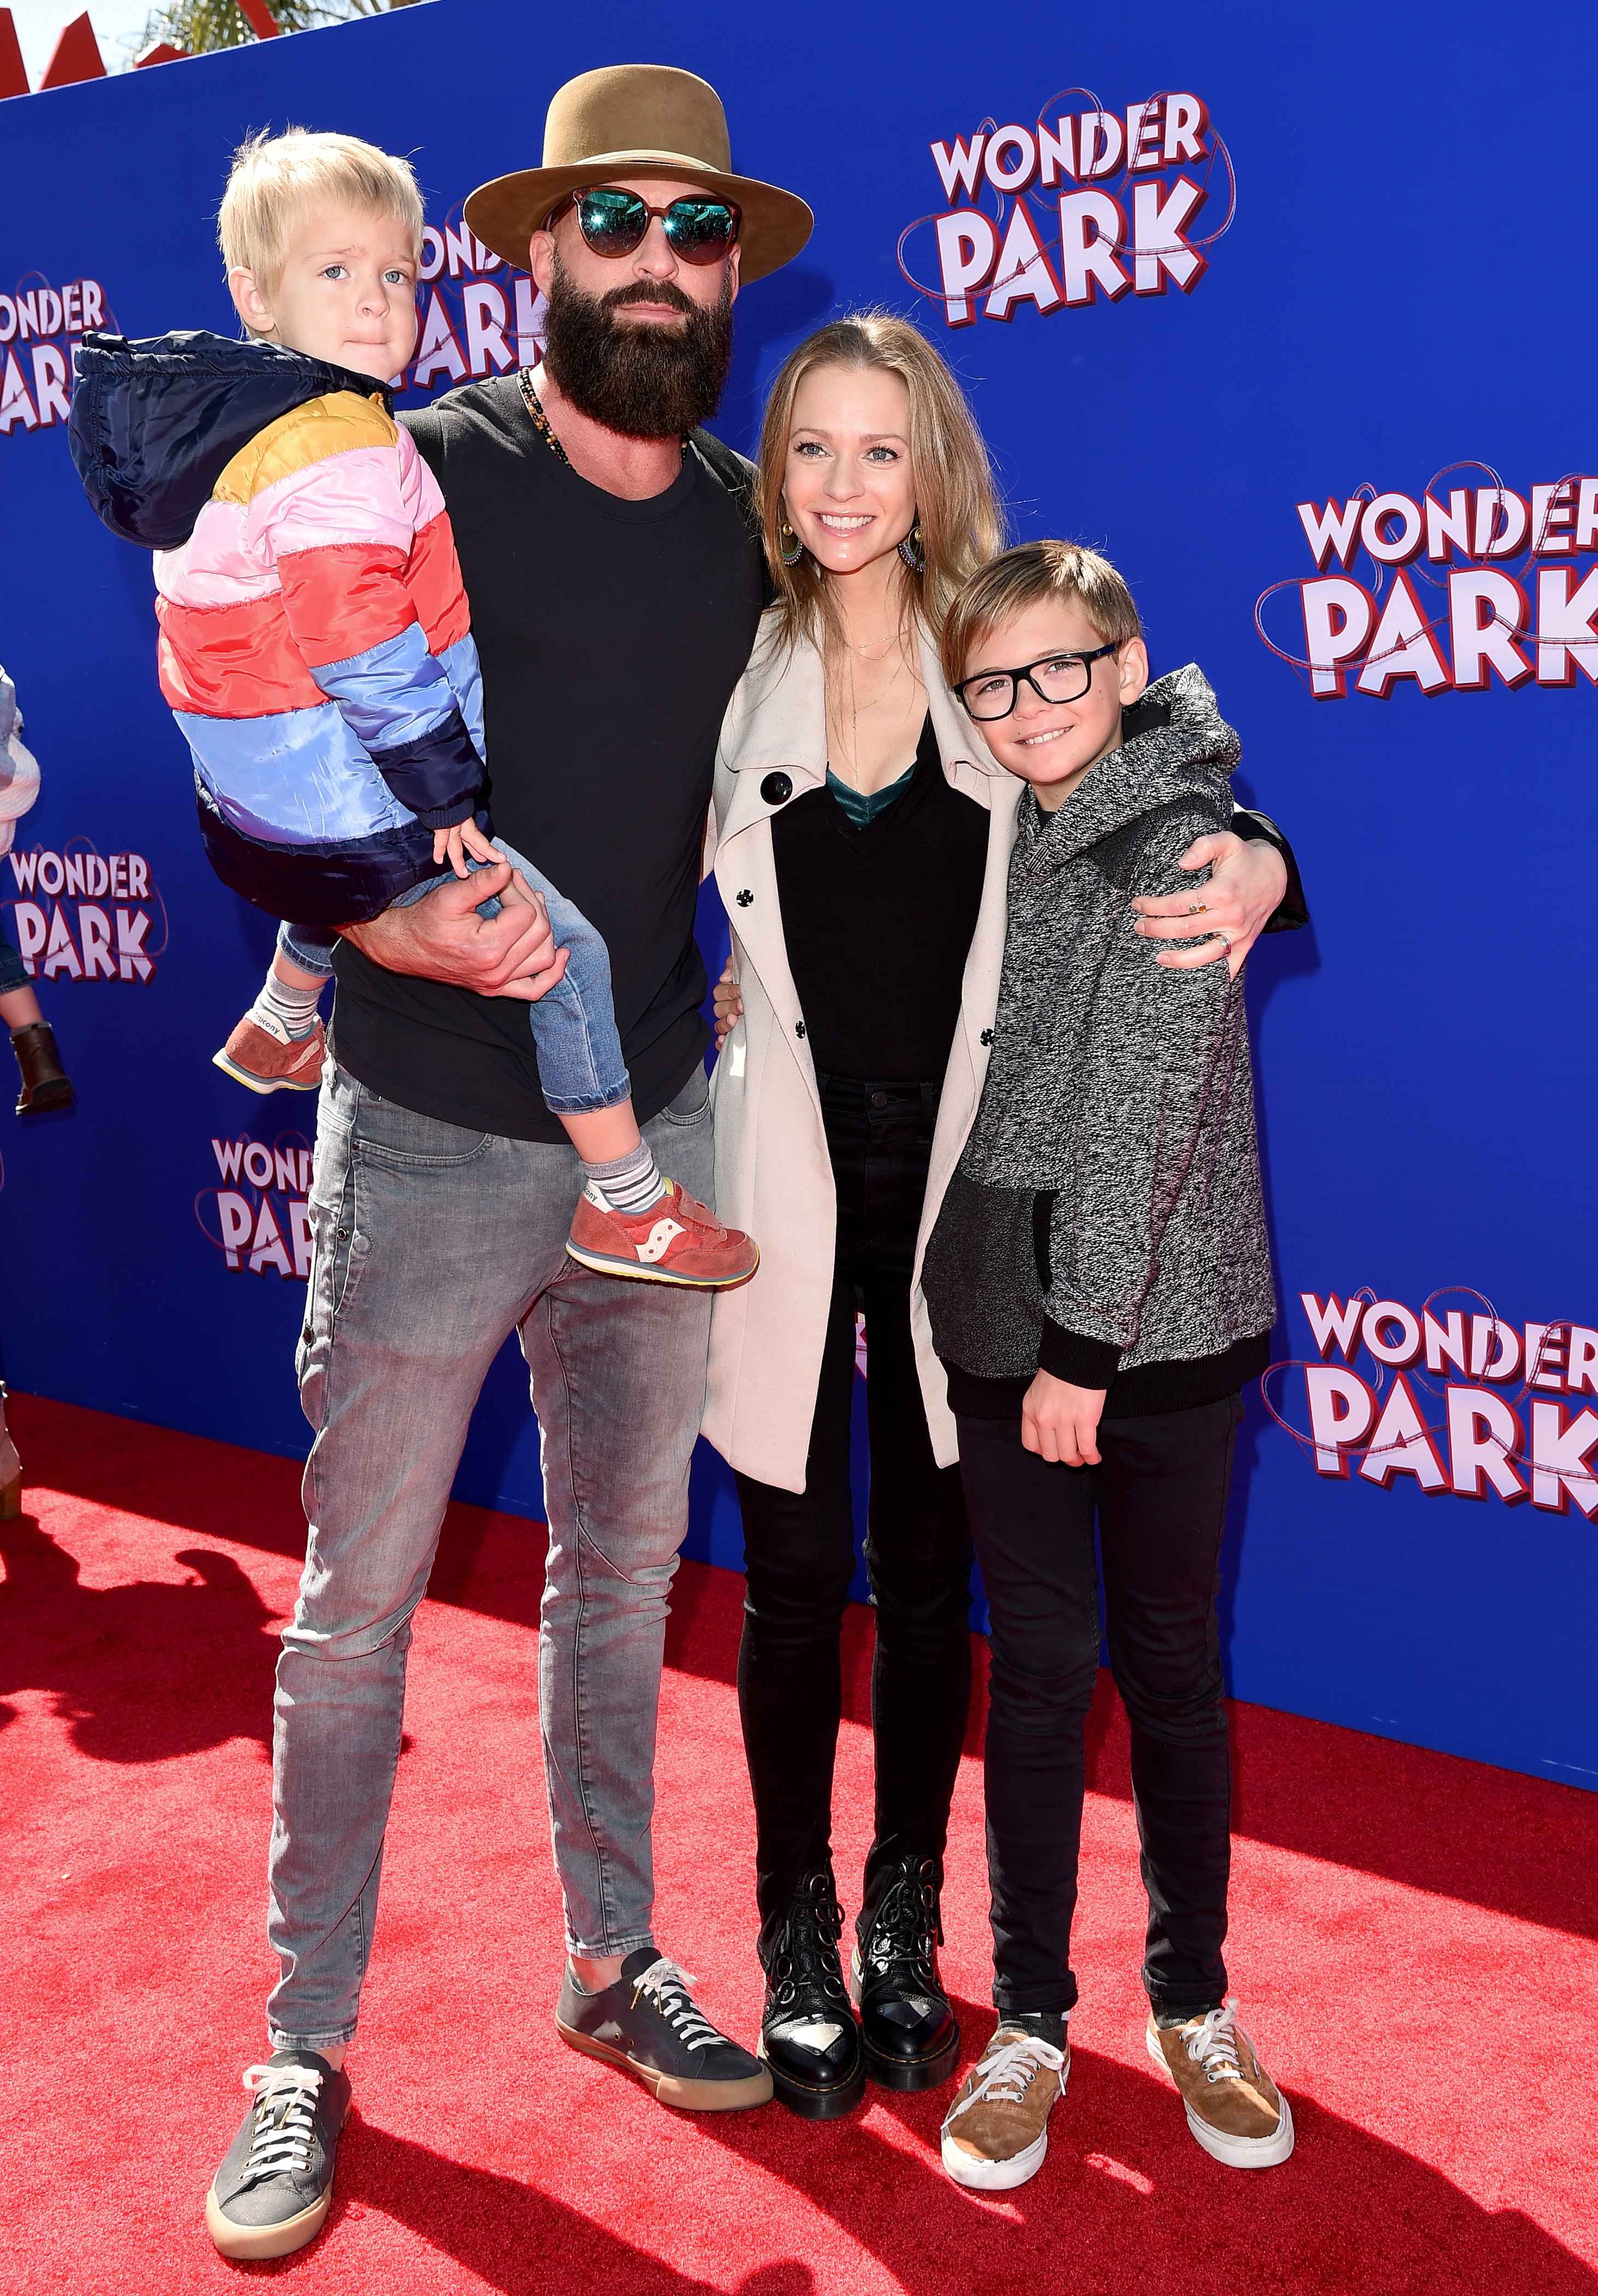  A.J. Cook, Nathan Andersen, Phoenix Sky Andersen, and Mekhai Allan Andersen attend the Paramount Pictures' 'Wonder Park' premiere at Regency Bruin Theatre on March 10, 2019, in Los Angeles, California. | Source: Getty Images